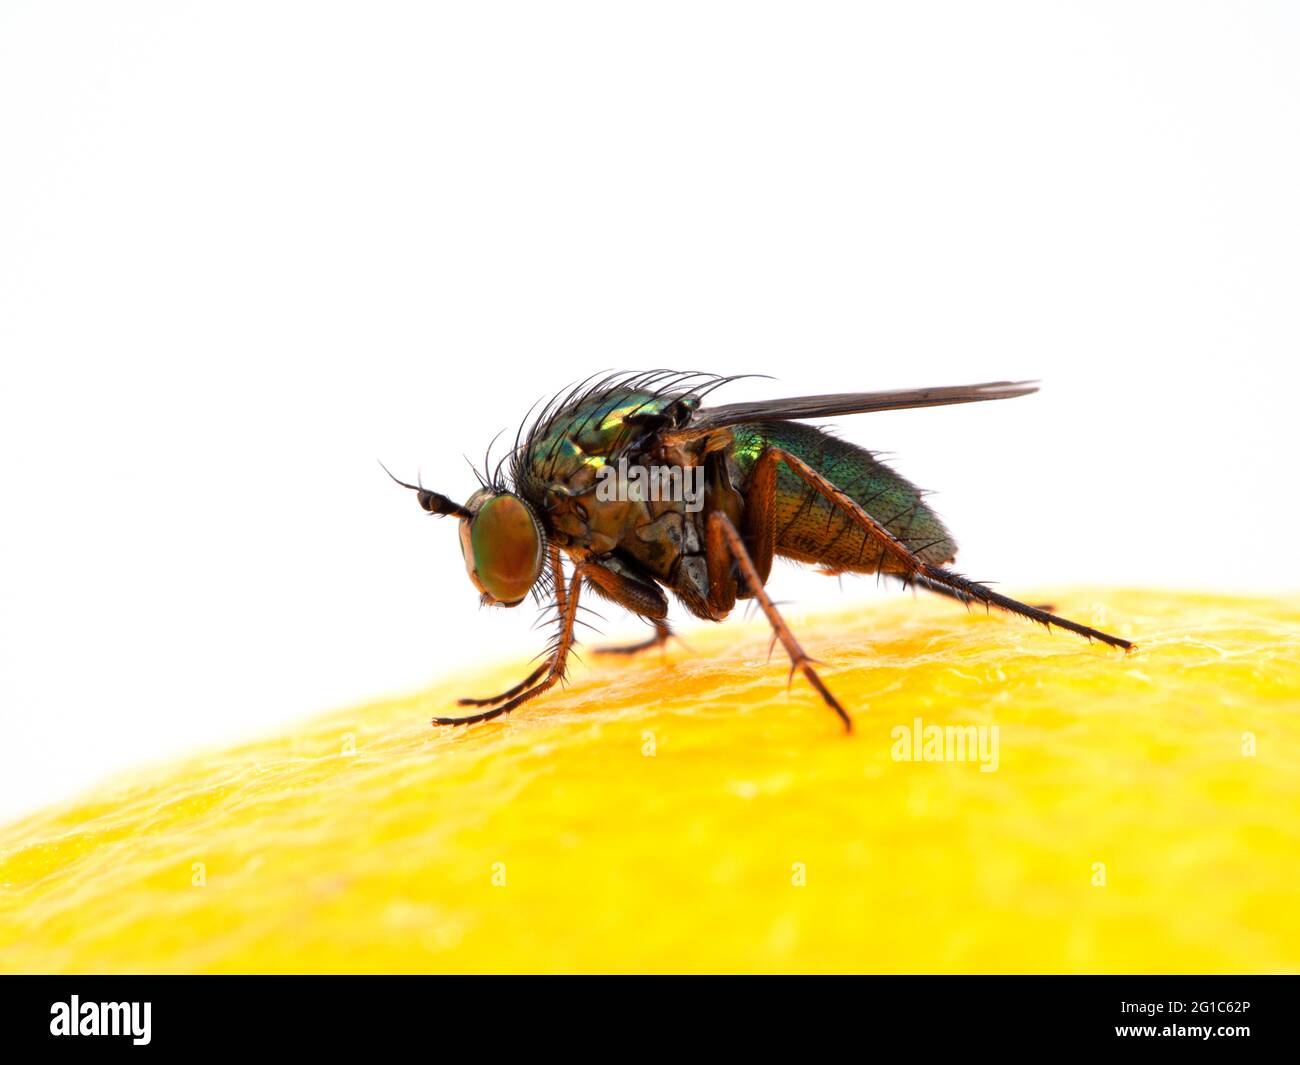 iridescent green long-legged fly, Dolichopodidae species, resting on the surface of a lemon Stock Photo